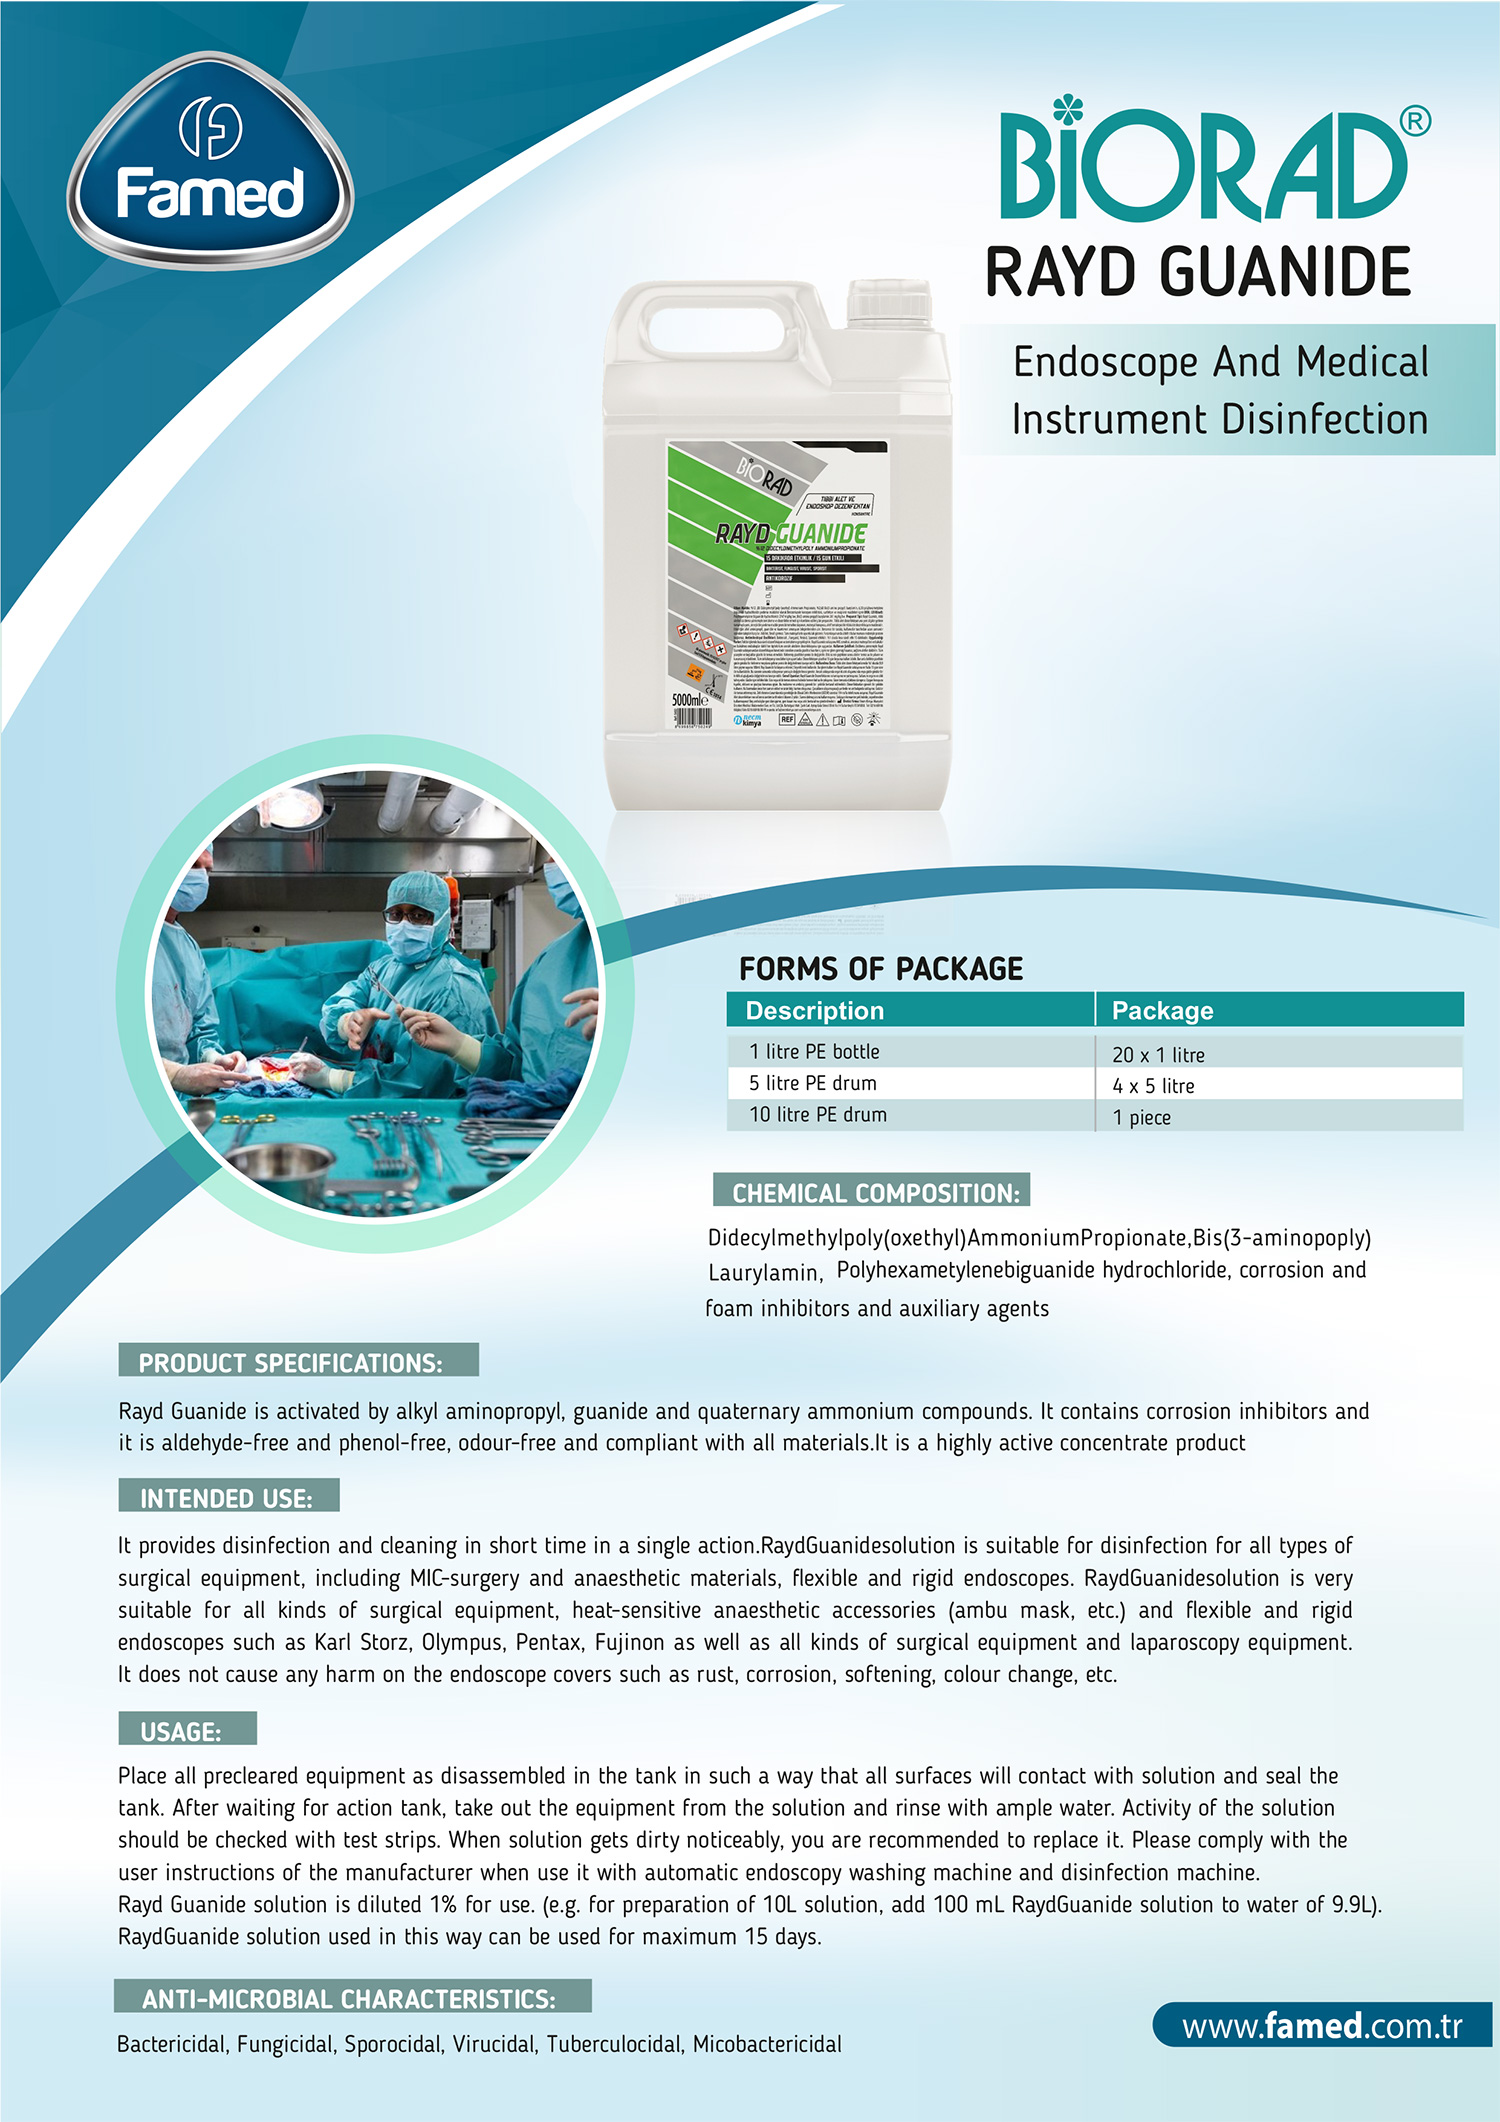 Rayd Guanide Endoscope And Medical Instrument Disinfection